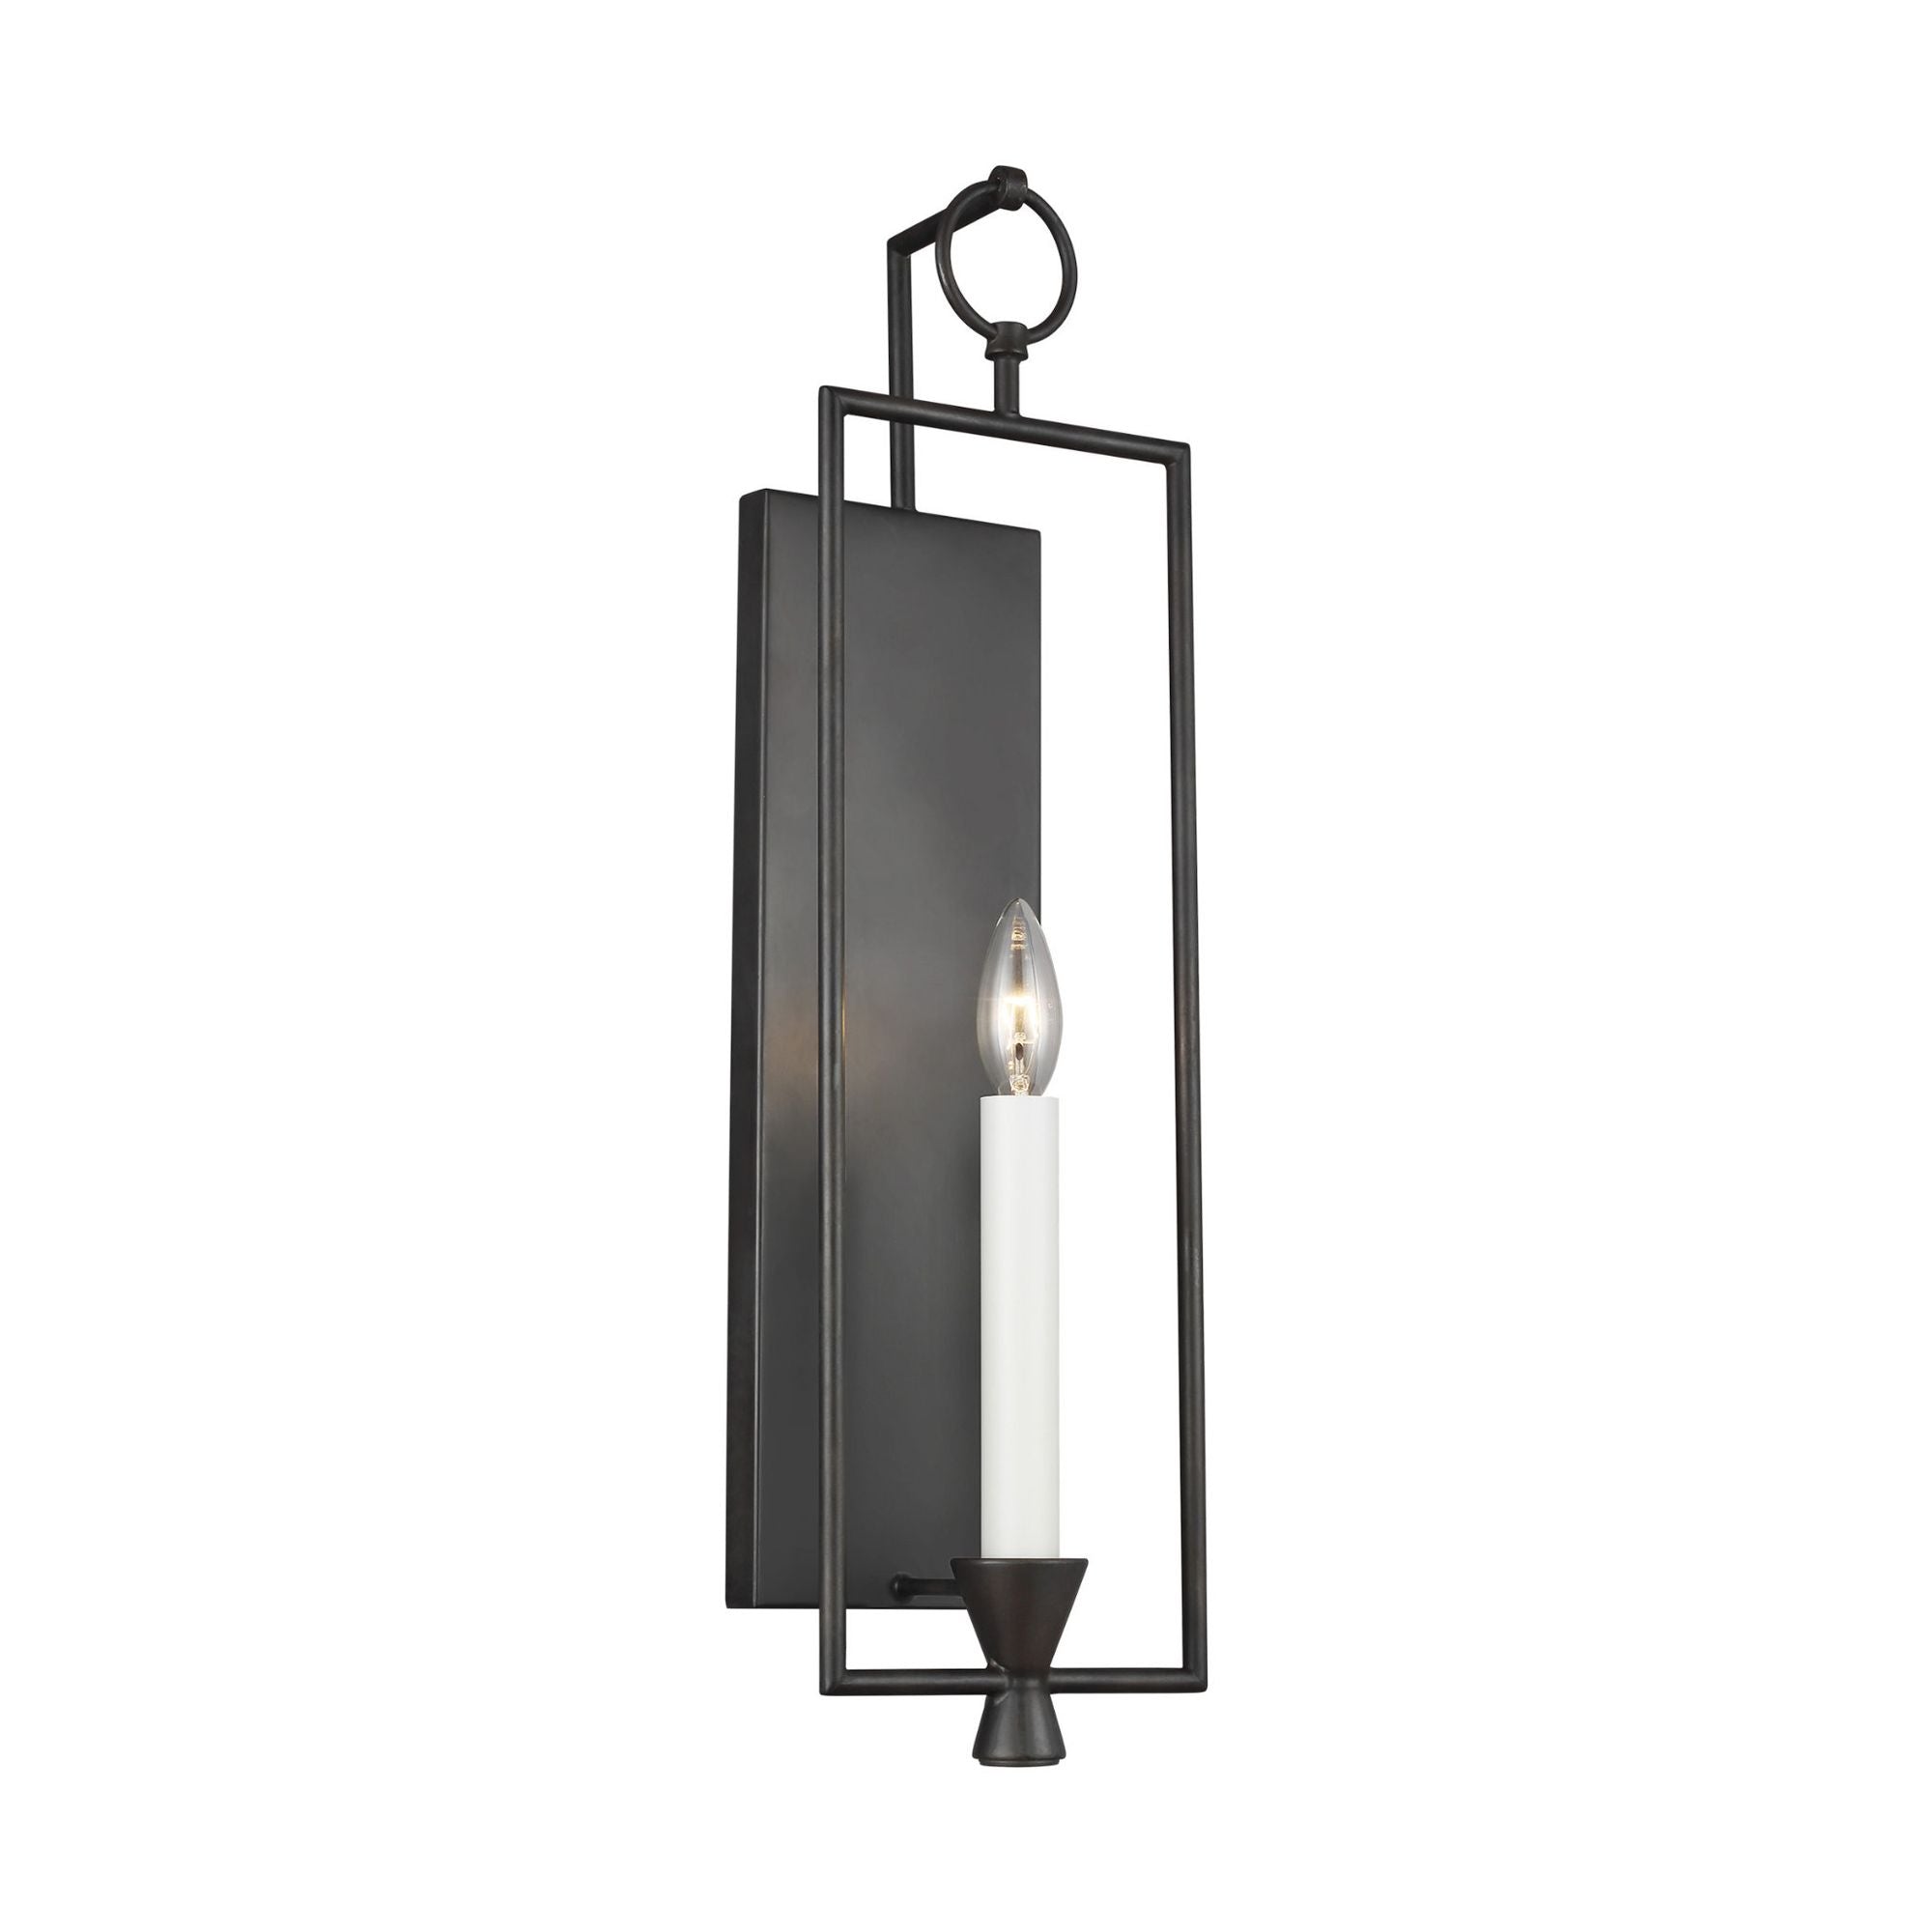 Chapman & Myers Keystone Sconce in Aged Iron